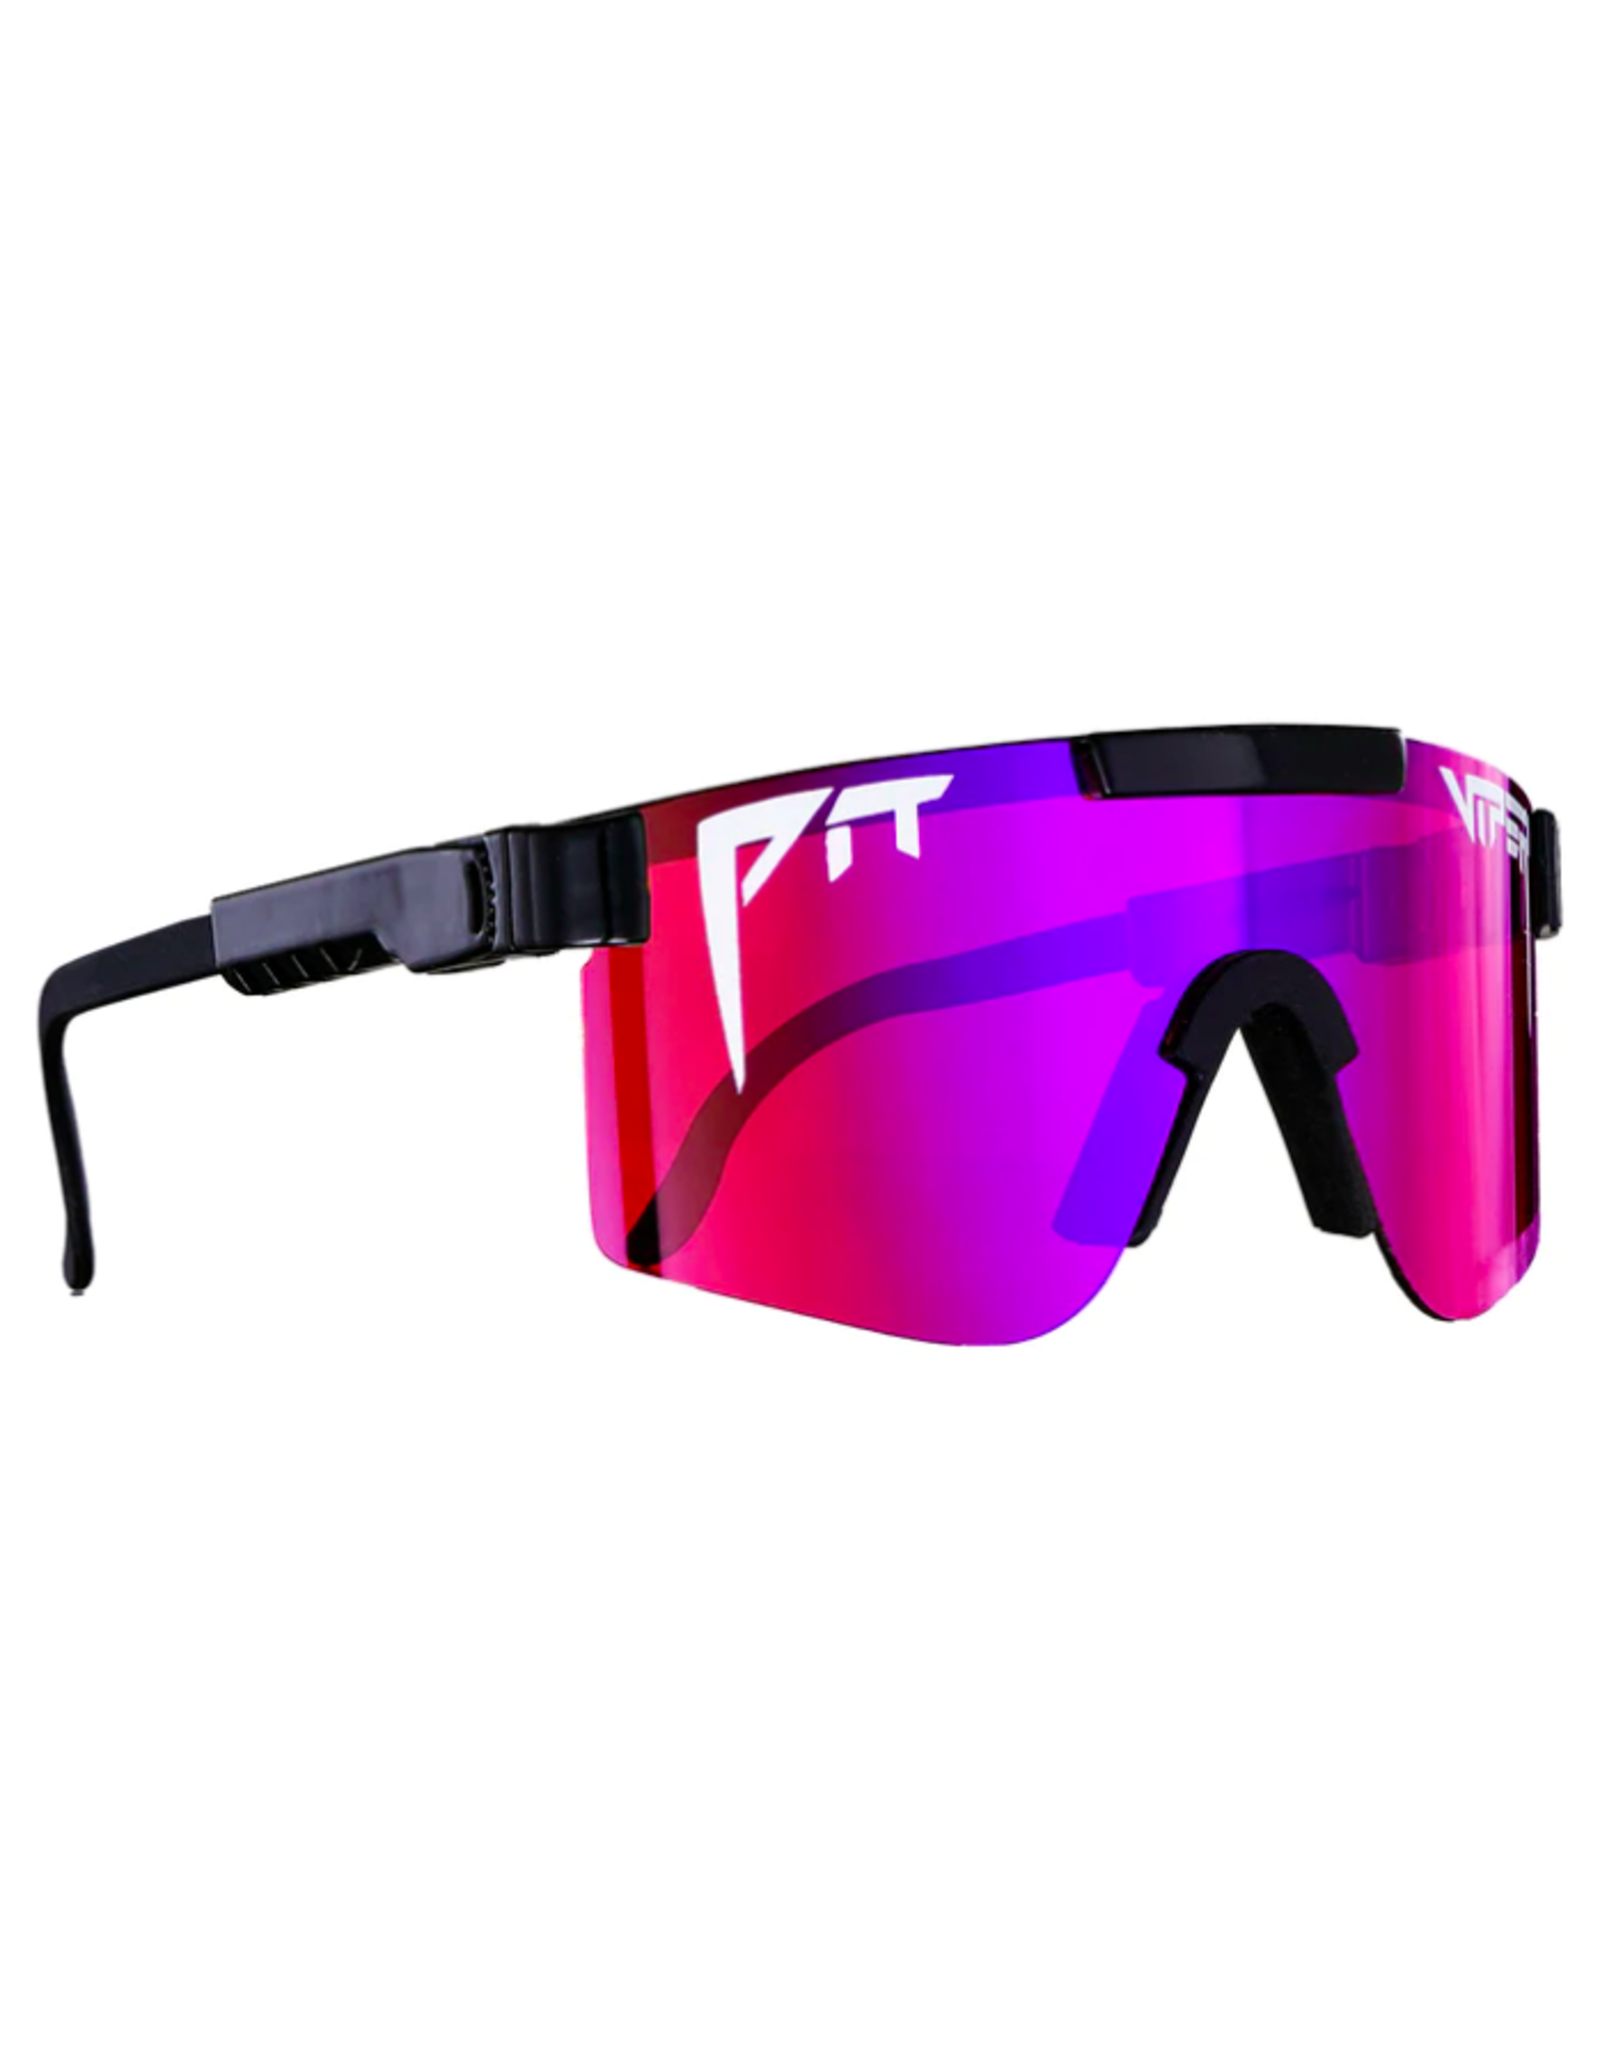 PIT VIPER Pit Viper The Mud Slinger Double Wide Sunglasses